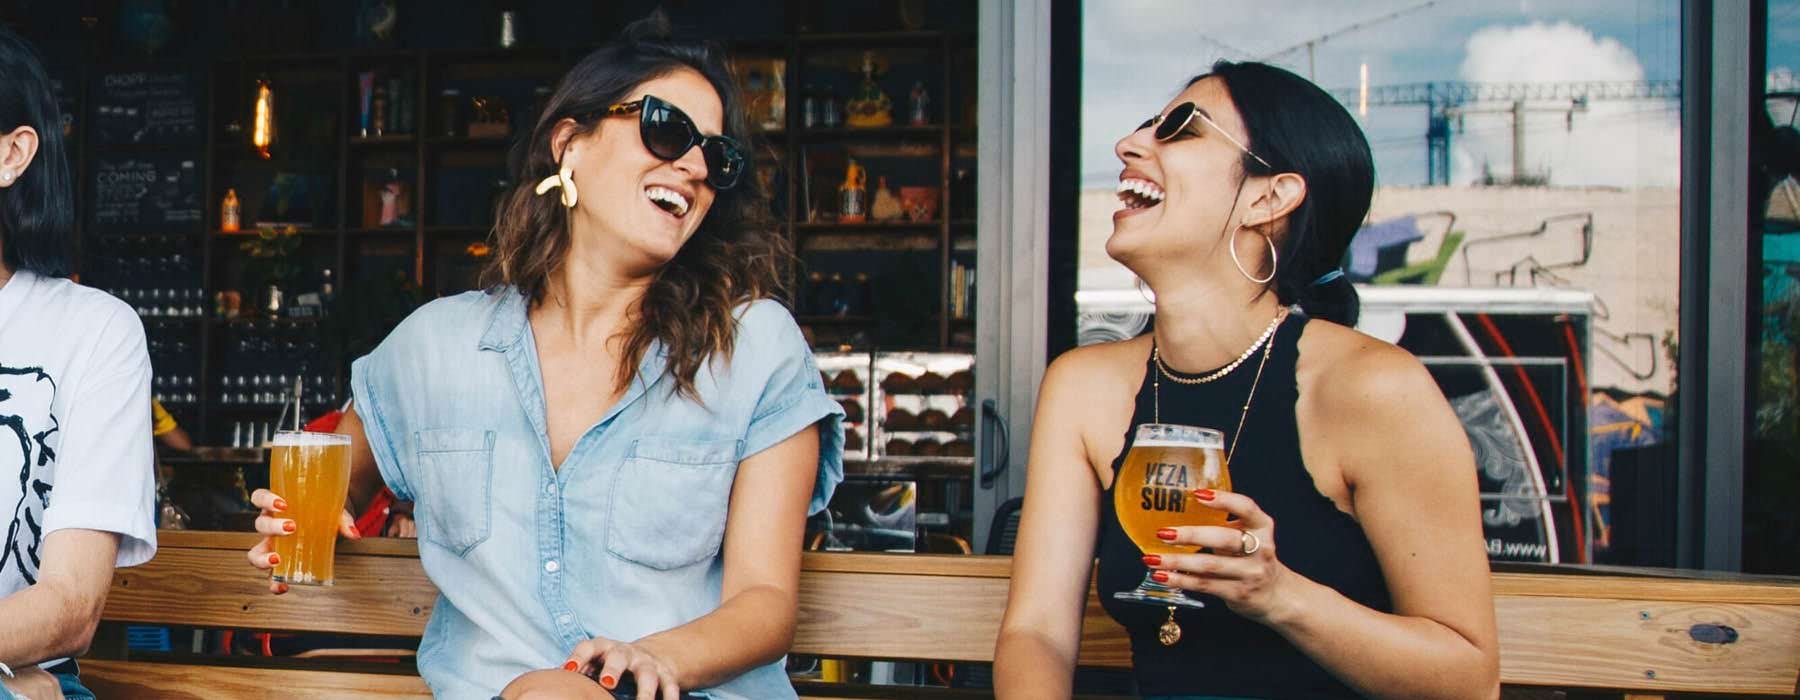 women with beers laugh outside pub